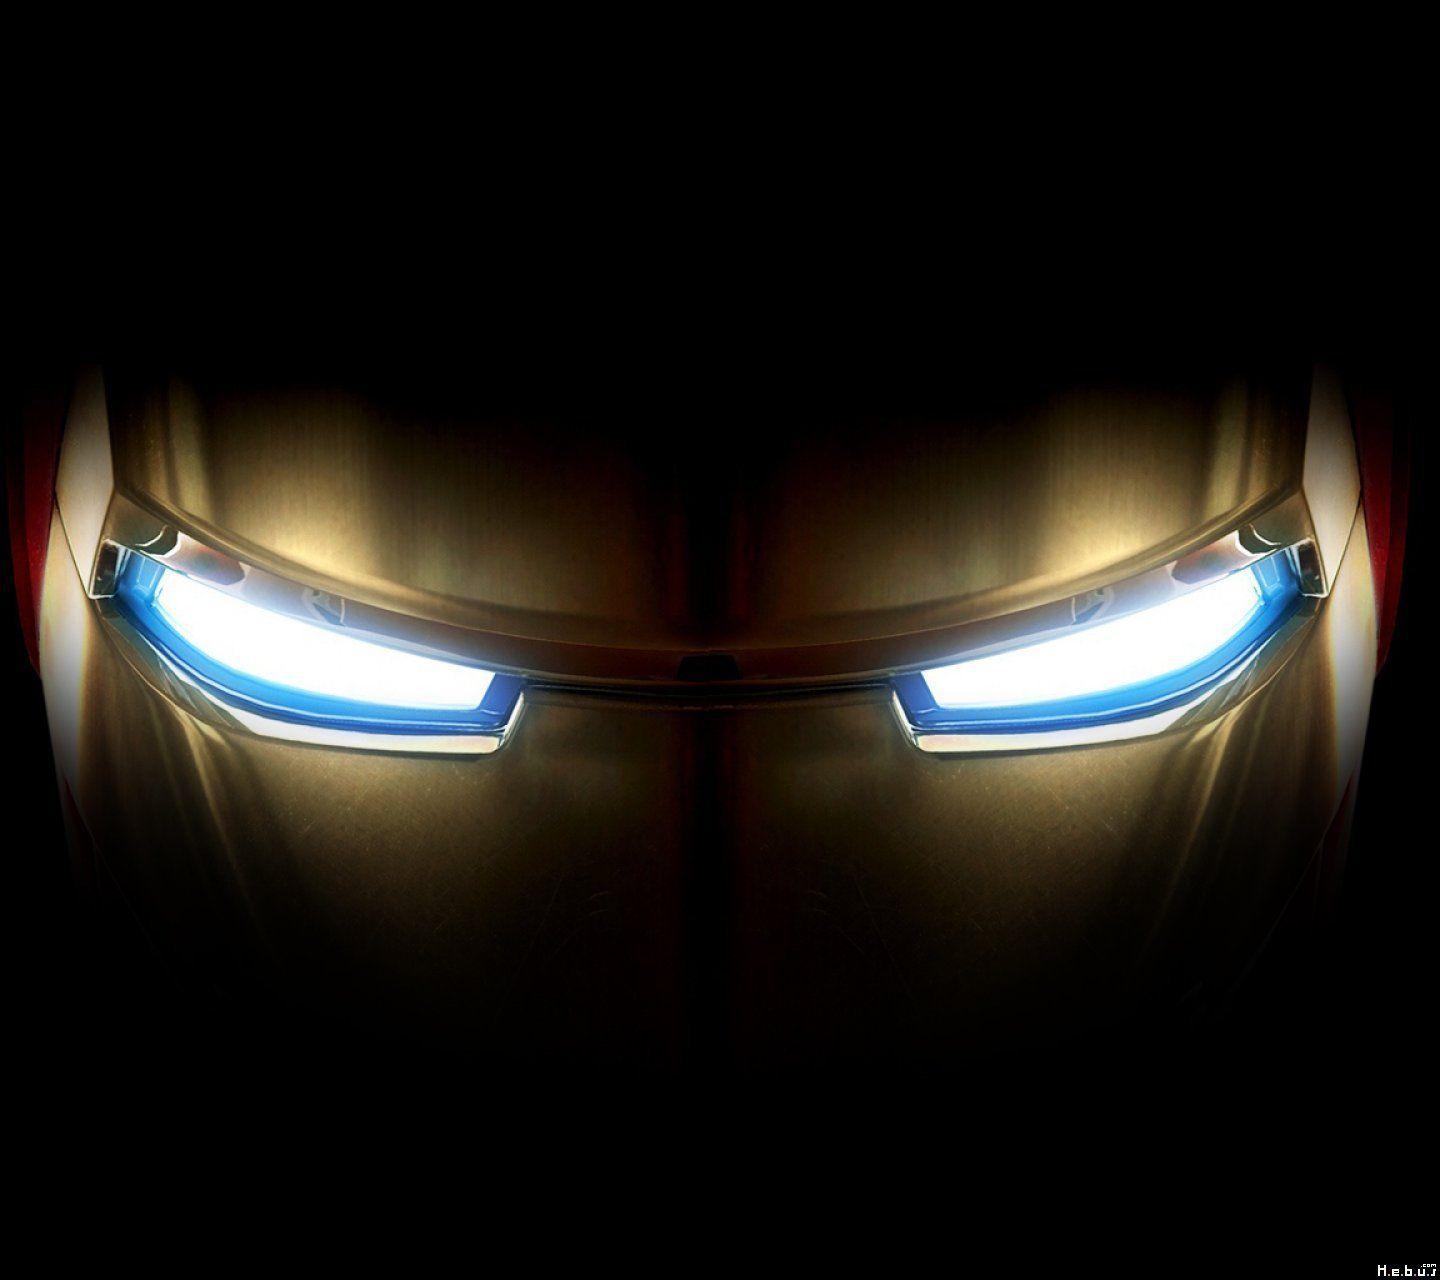 Iron Man HD Wallpaper Collection For Free Download. HD Wallpaper